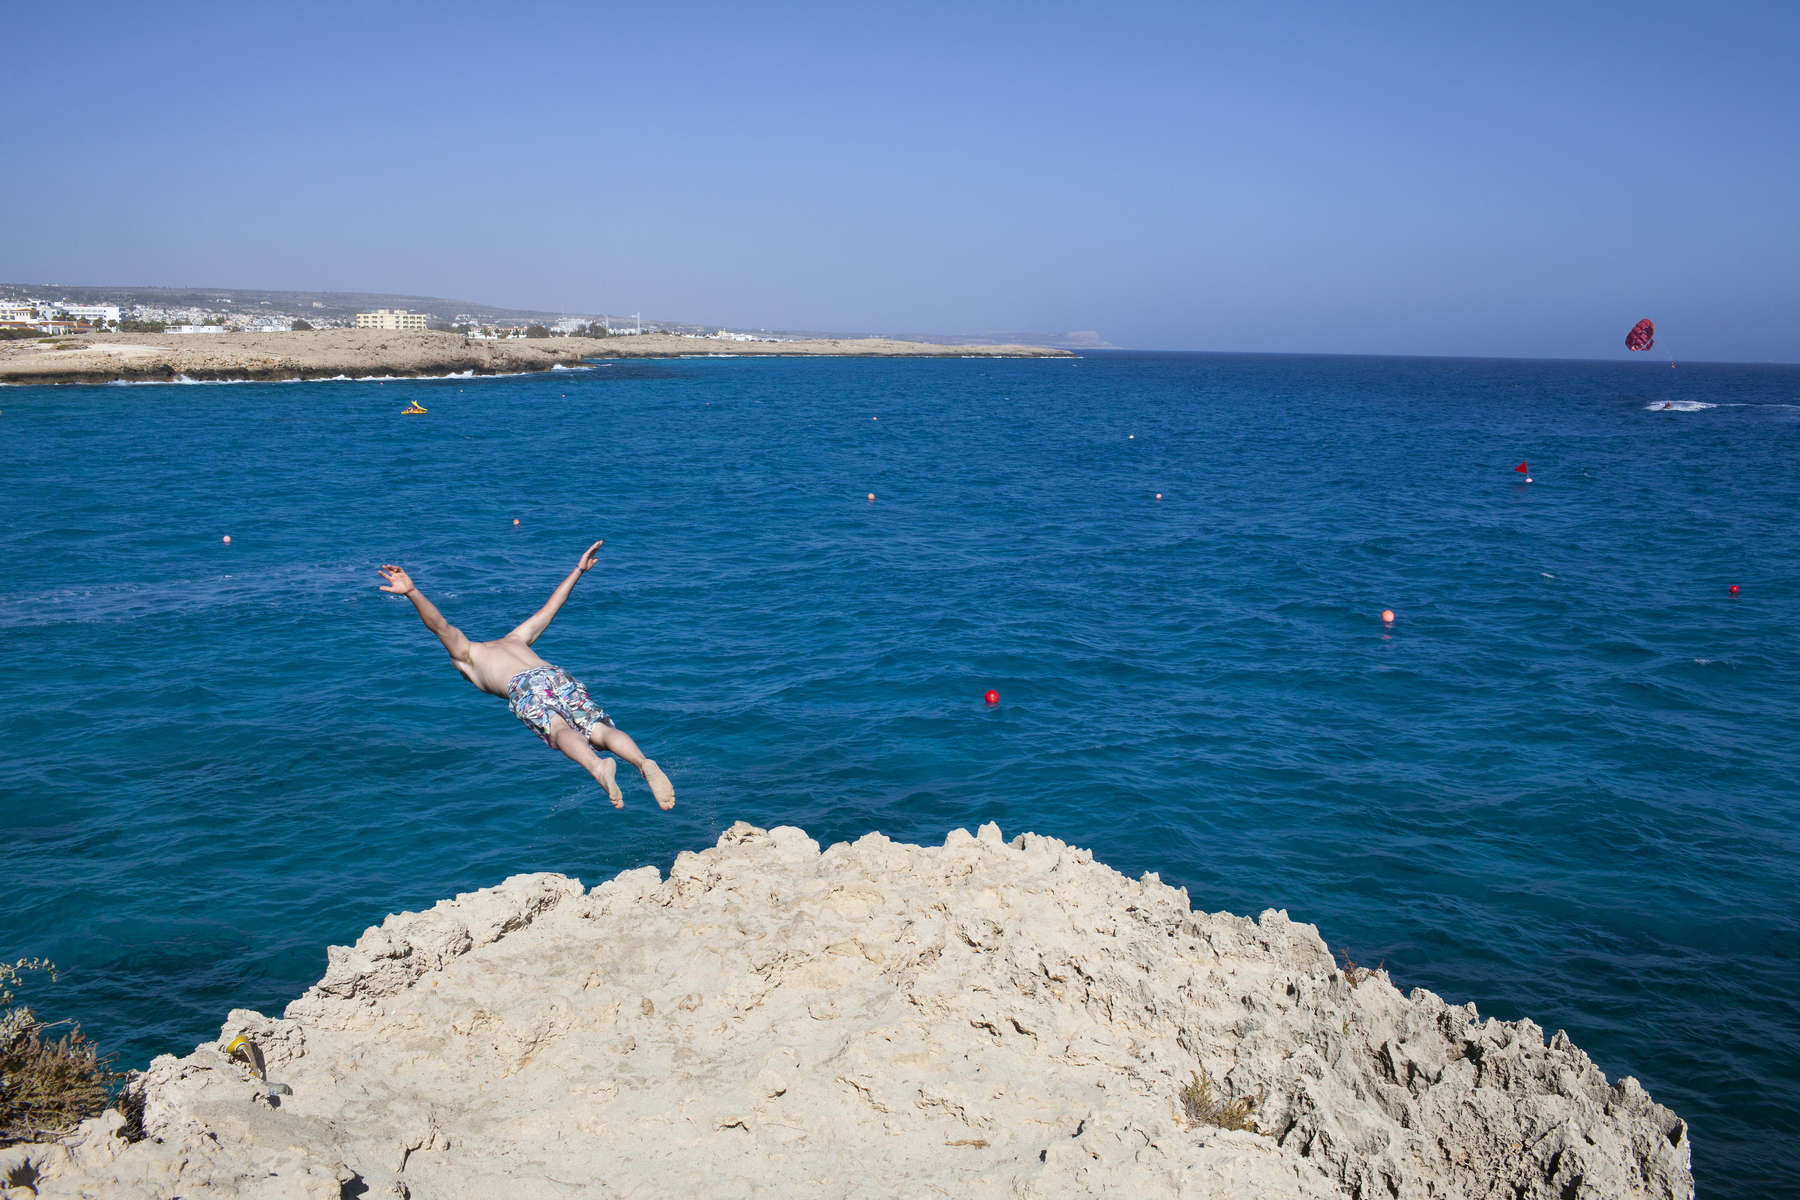 16:42 A British man swallow dives into the sea from a cliff near Nissi Beach, Ayia Napa, Cyprus.